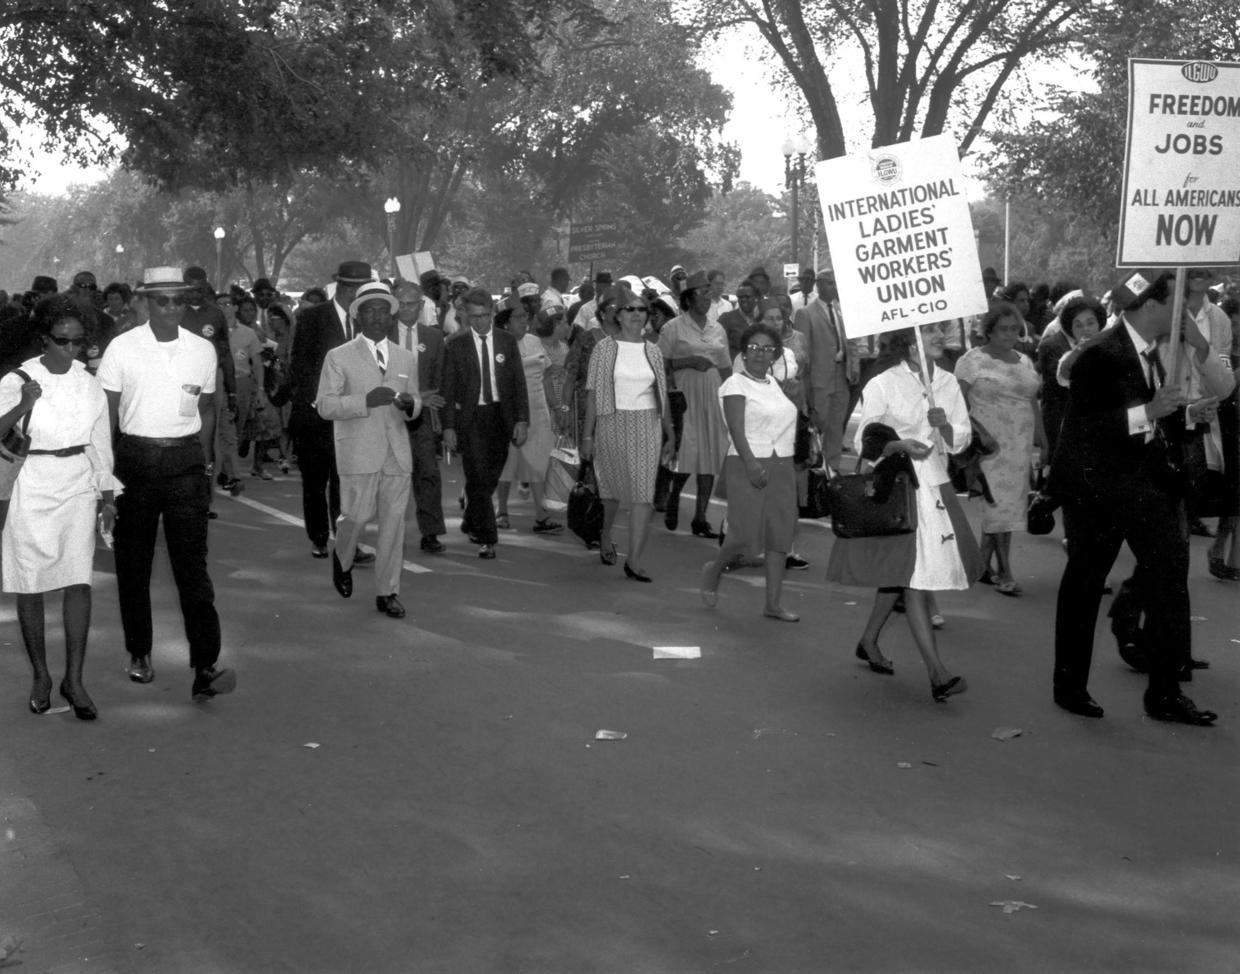 Rare photos of the March on Washington for Jobs and Freedom from 1963